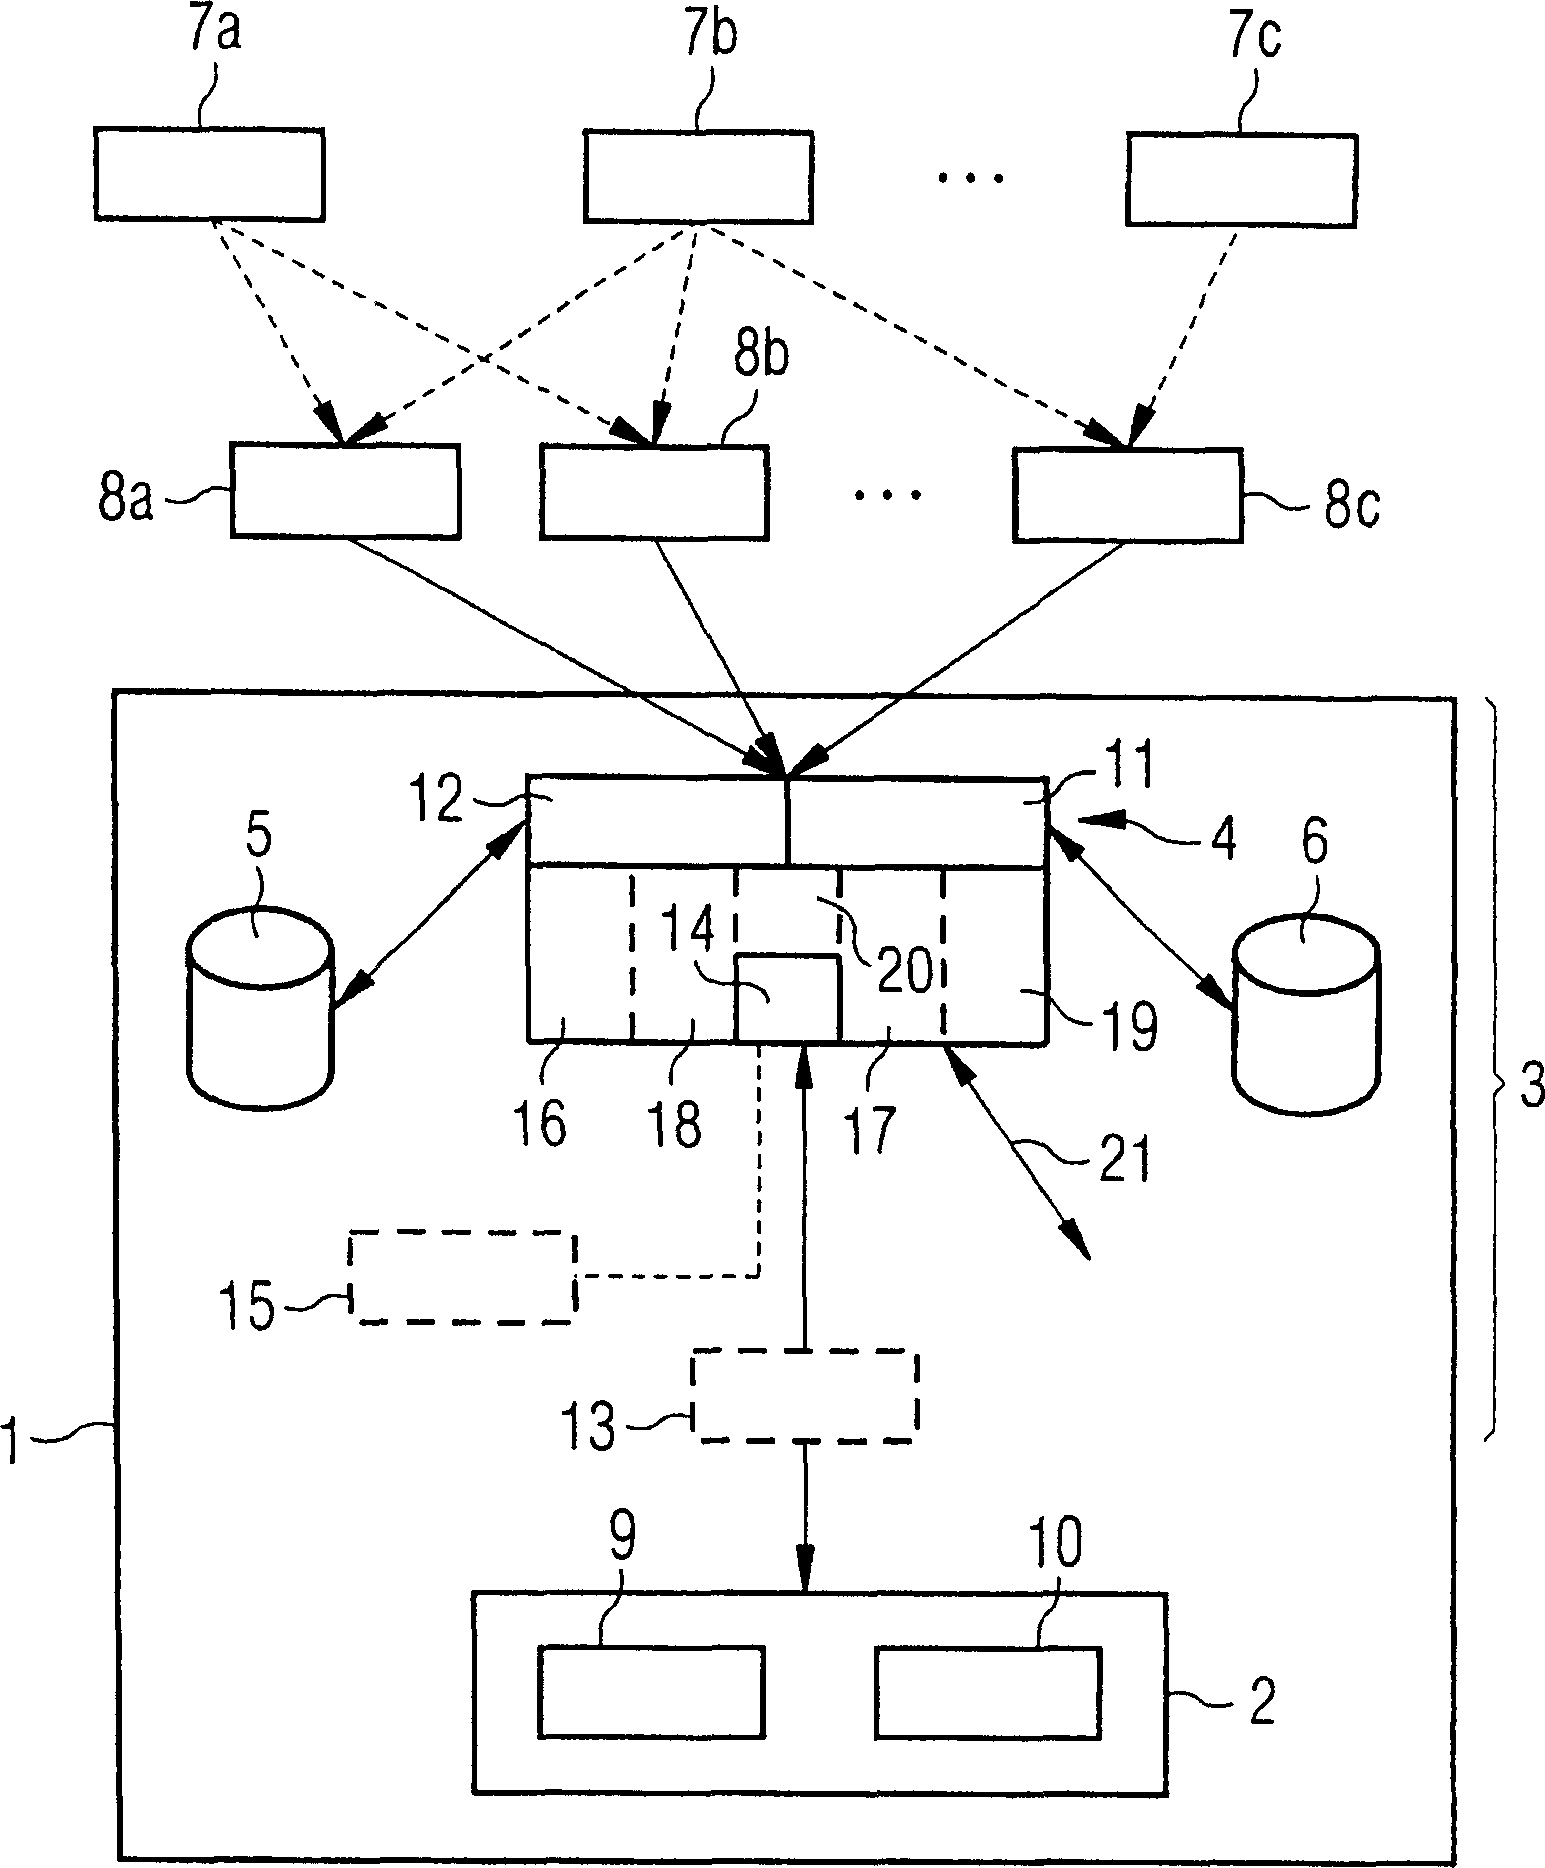 Facility for importing a machine-readable data model, particularly medical guidelines, into a workflow management system